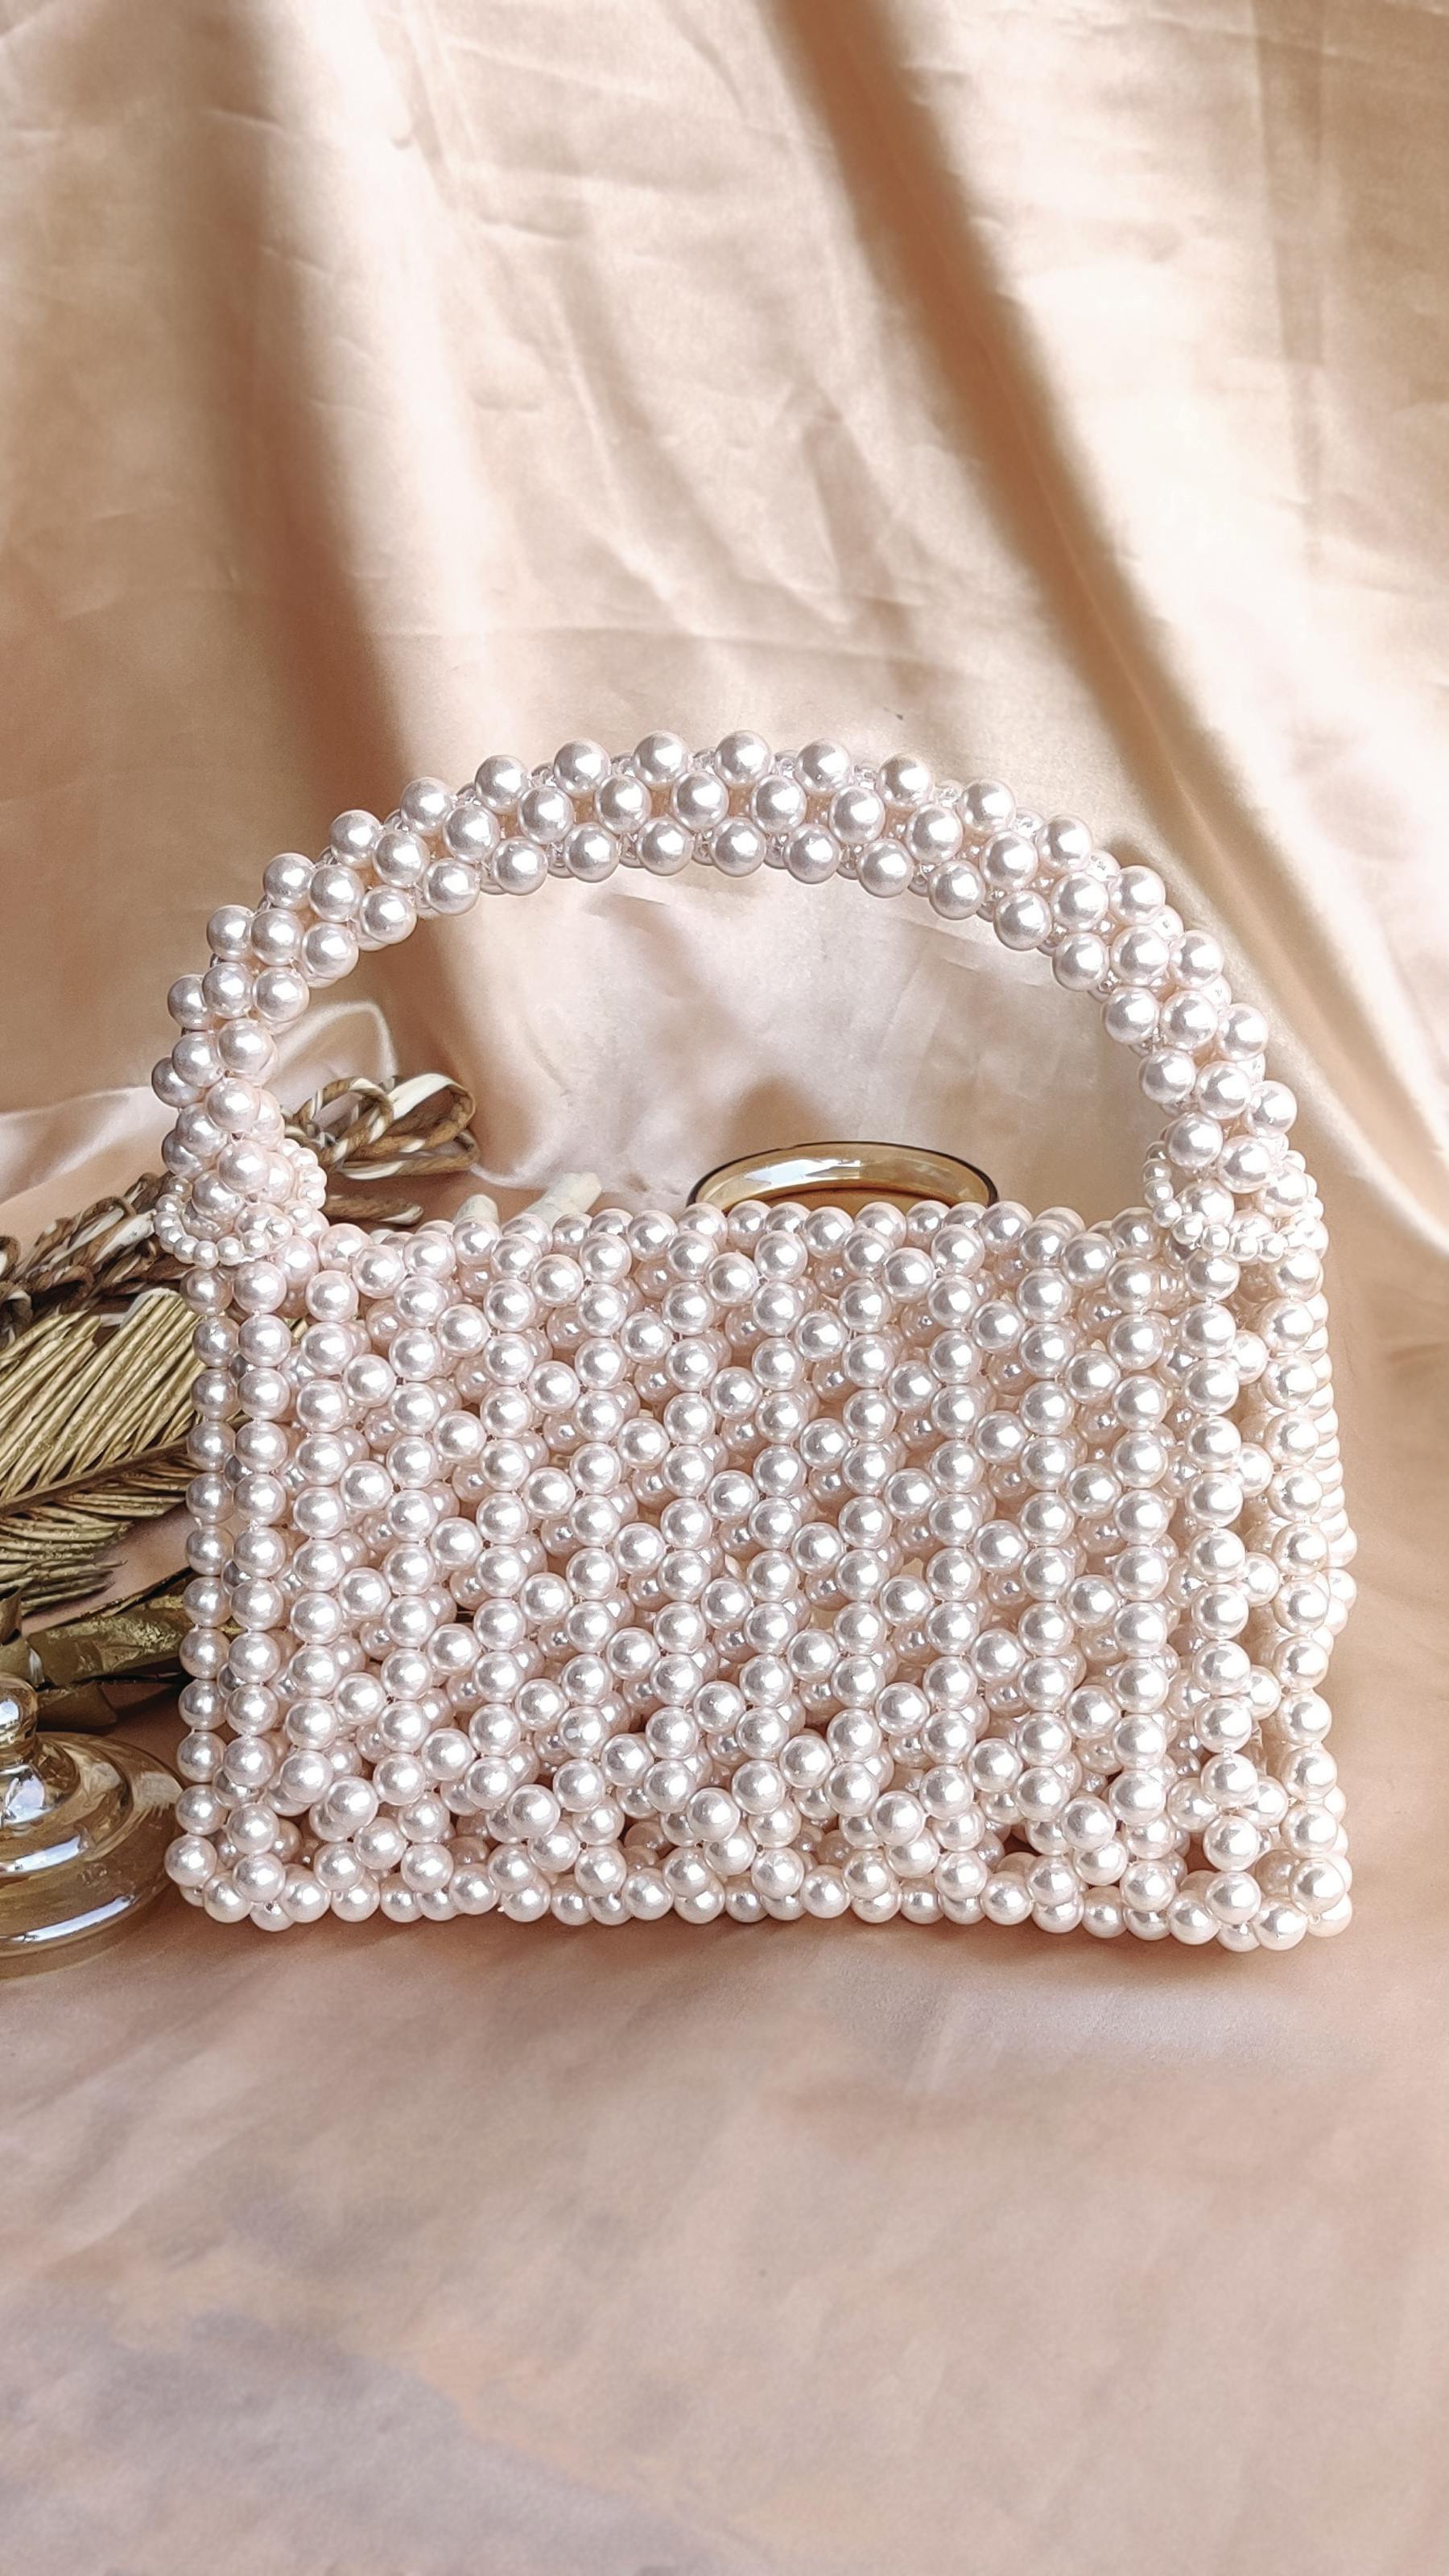 The Triangle Pearl Bag, a product by Clutcheeet